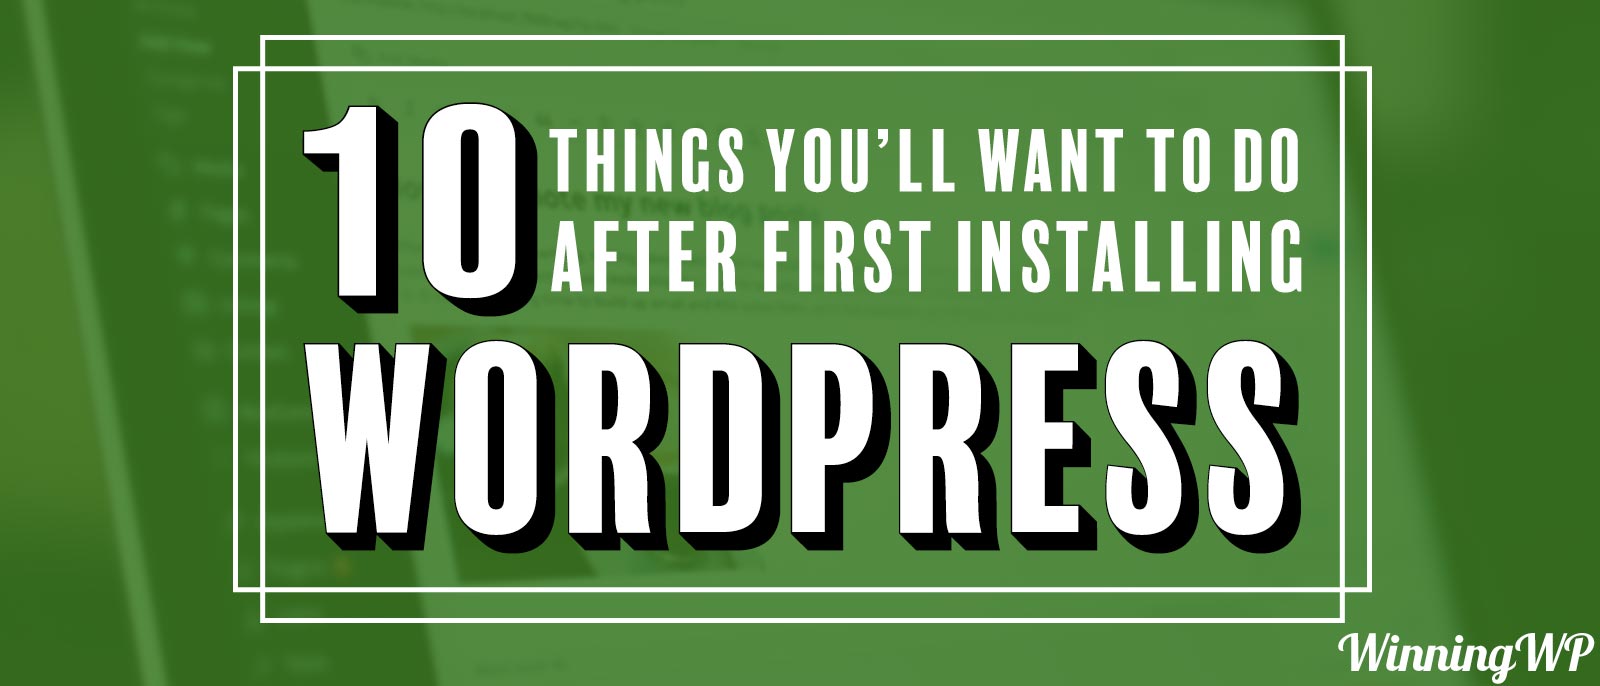 Ten things to do after installing WordPress